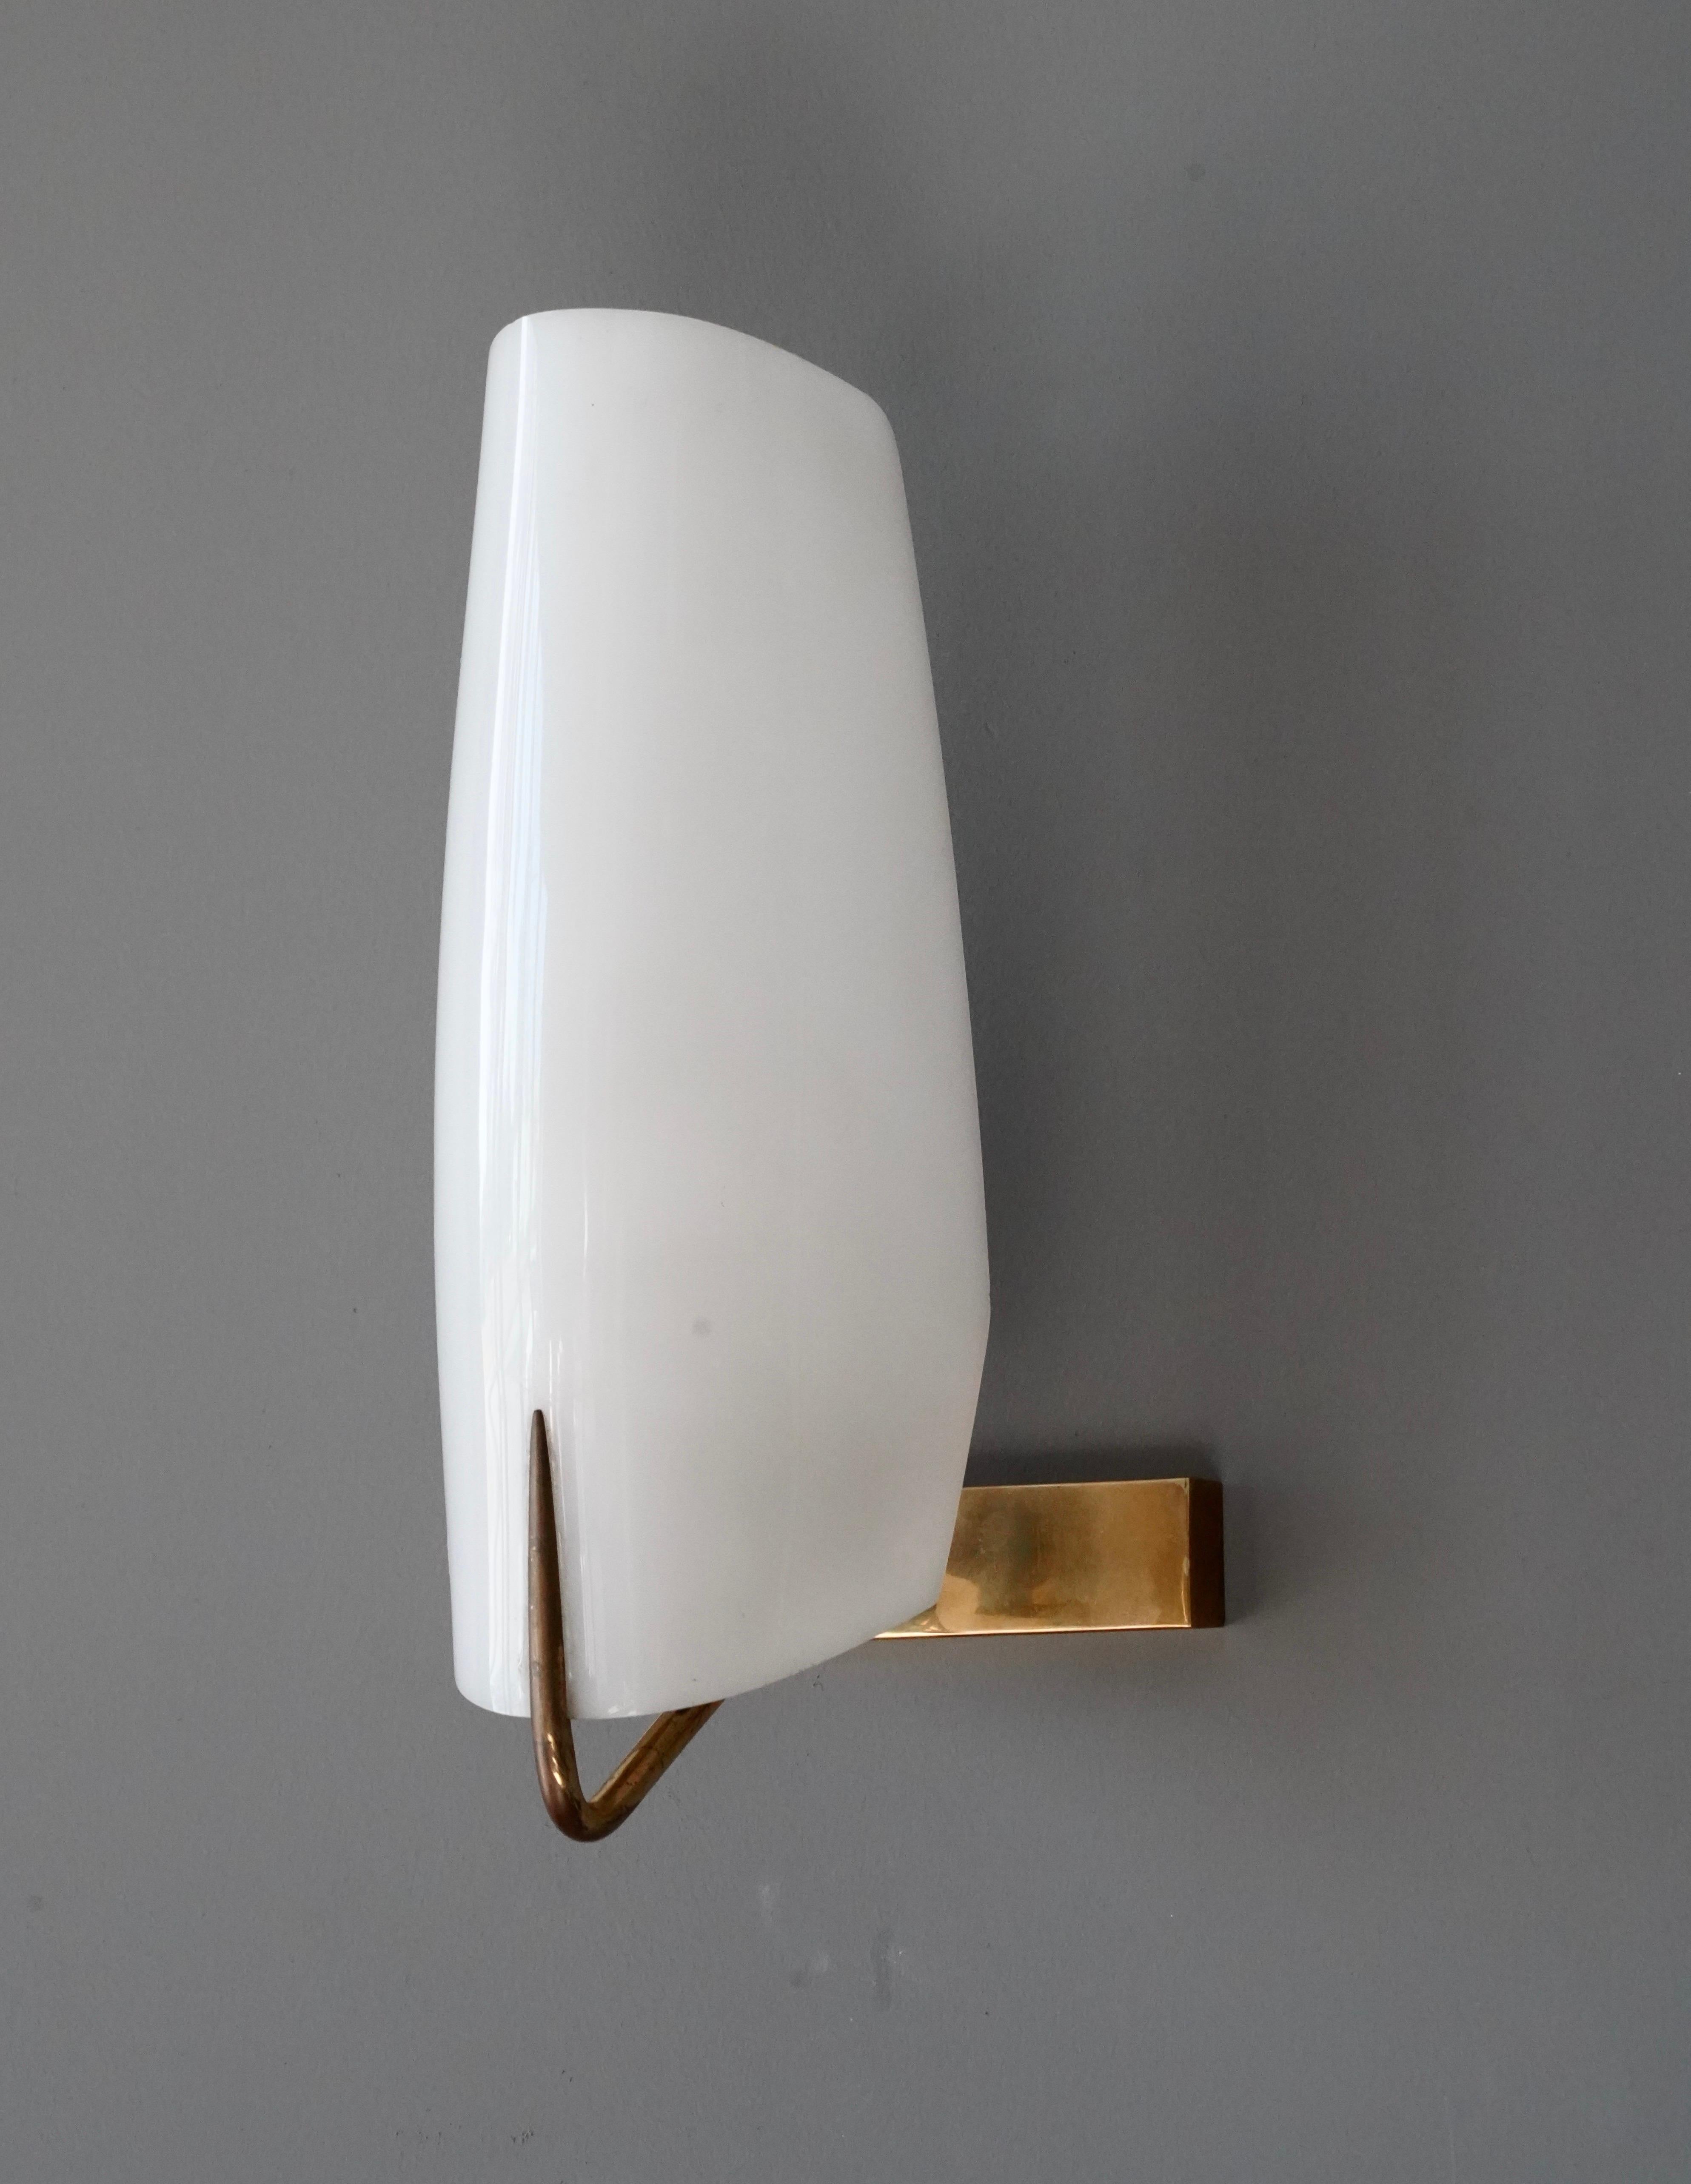 A minimalist wall light / sconce, design and production attributed to Stilnovo, Italy, 1950s. Features brass and acrylic.

Other designers of the period include Angelo Lelii, Gino Sarfatti, Max Ingrand, Serge Mouille.

